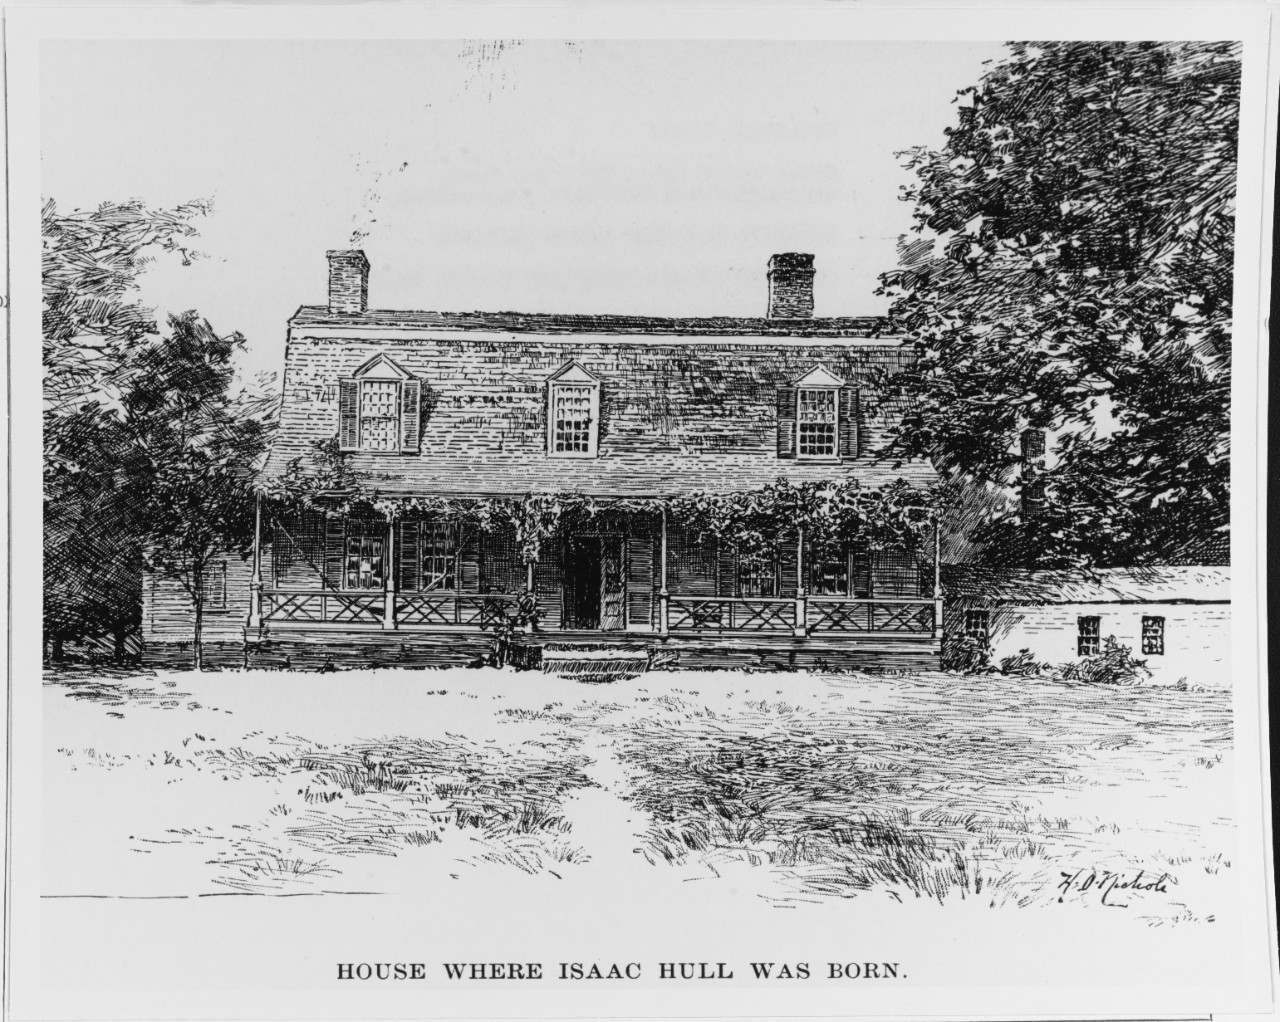 Drawing of house where Isaac Hull was born, Huntington (now Shelton), Connecticut